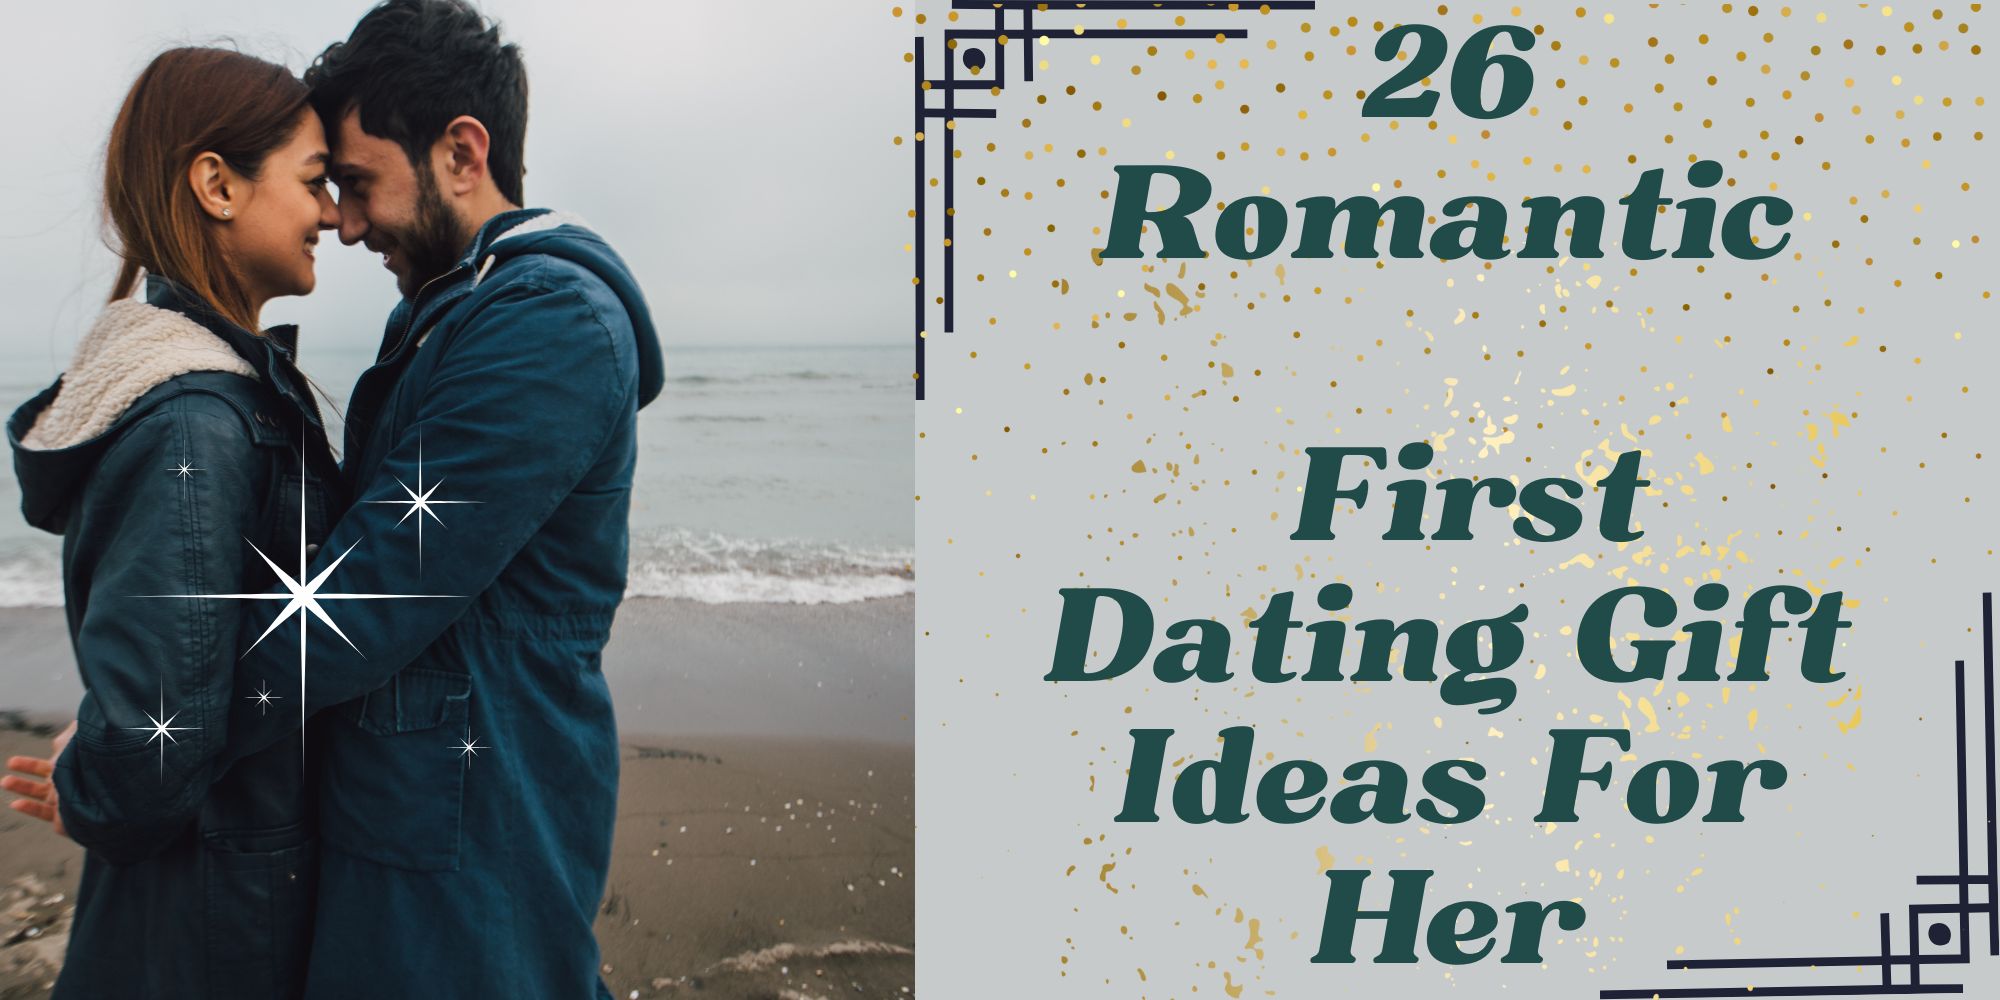 26 Romantic First Dating Gift Ideas For Her